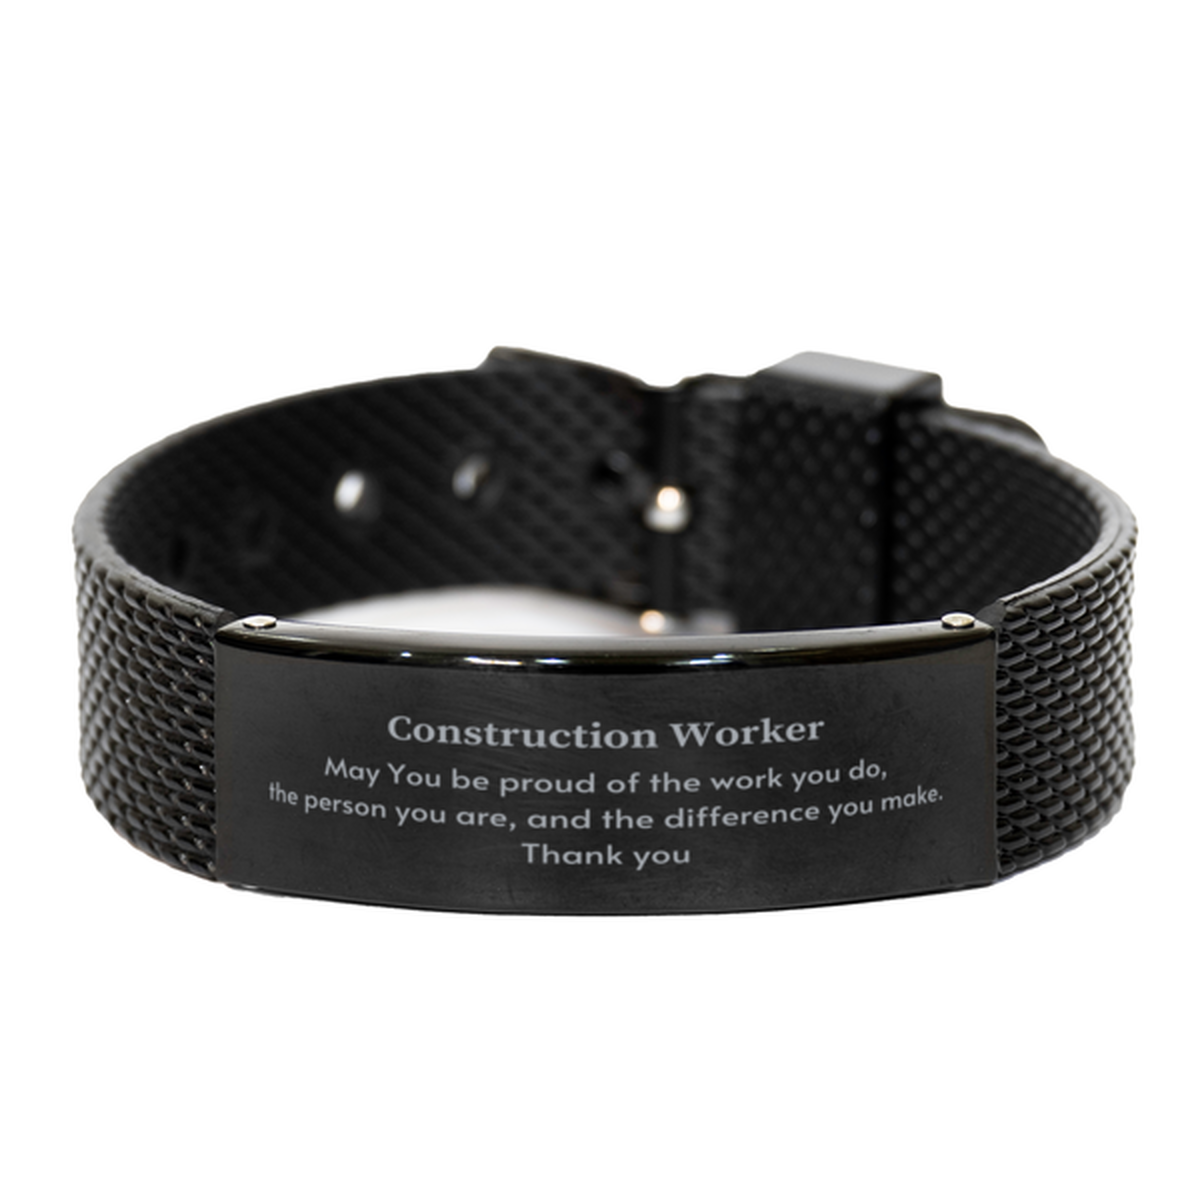 Heartwarming Black Shark Mesh Bracelet Retirement Coworkers Gifts for Construction Worker, Construction Worker May You be proud of the work you do, the person you are Gifts for Boss Men Women Friends